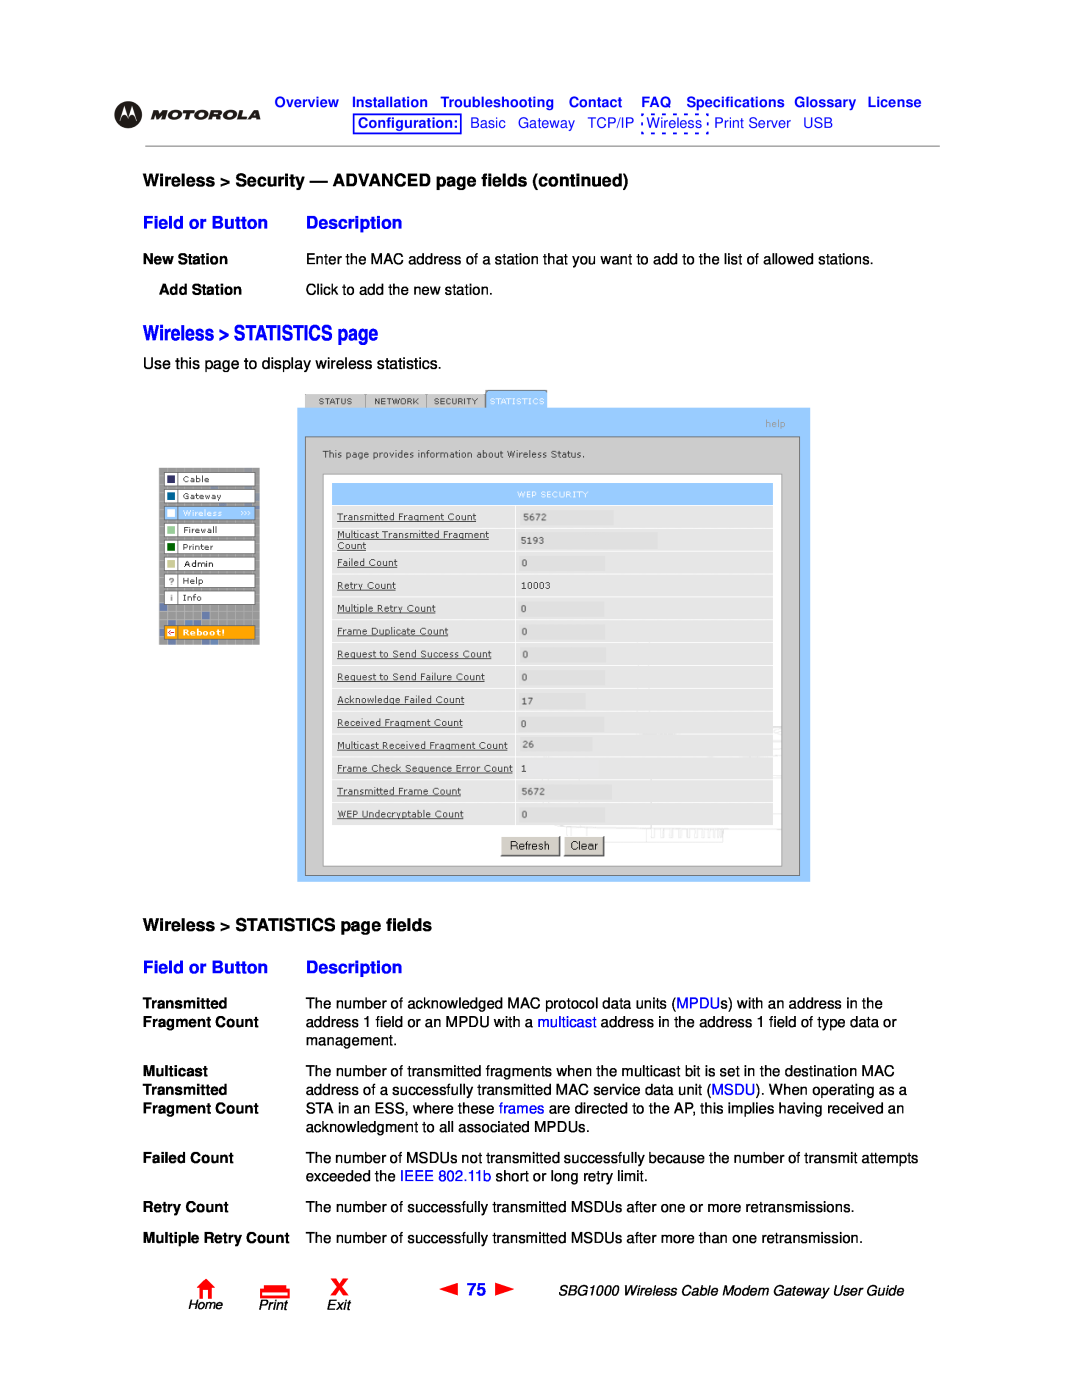 Motorola SBG1000 manual Wireless STATISTICS page, Wireless Security - ADVANCED page fields continued, Field or Button 